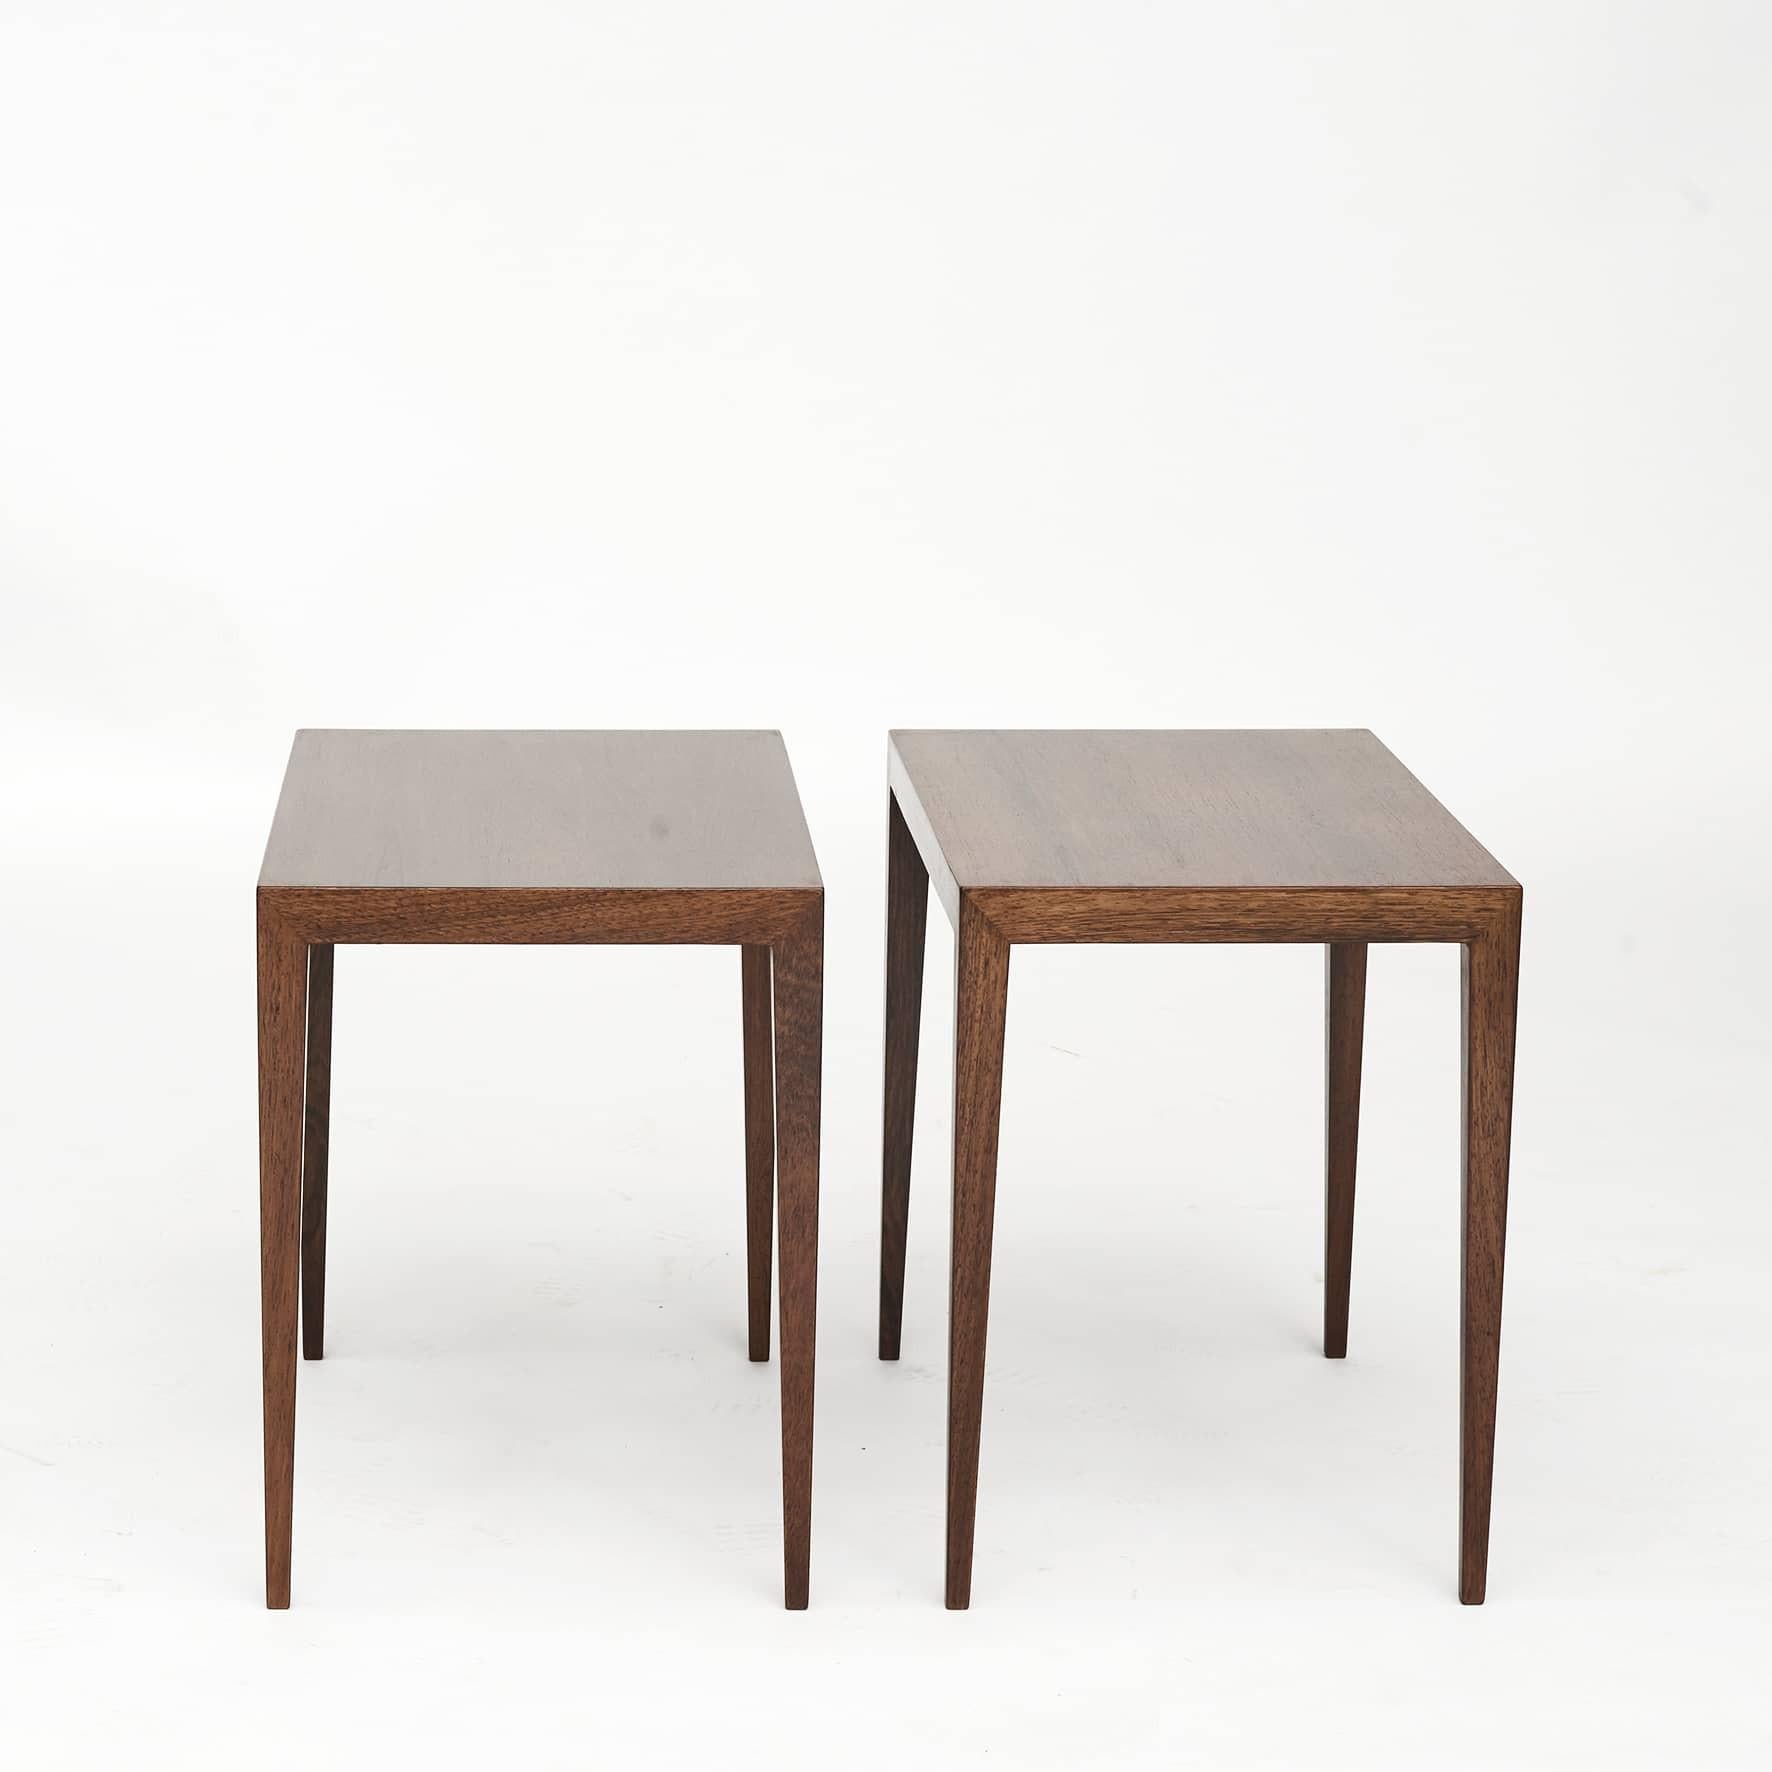 Severin Hansen.
Pair of side tables in hardwood.
Made at Haslev furniture carpentry approx. 1965.
Repolished, good condition.